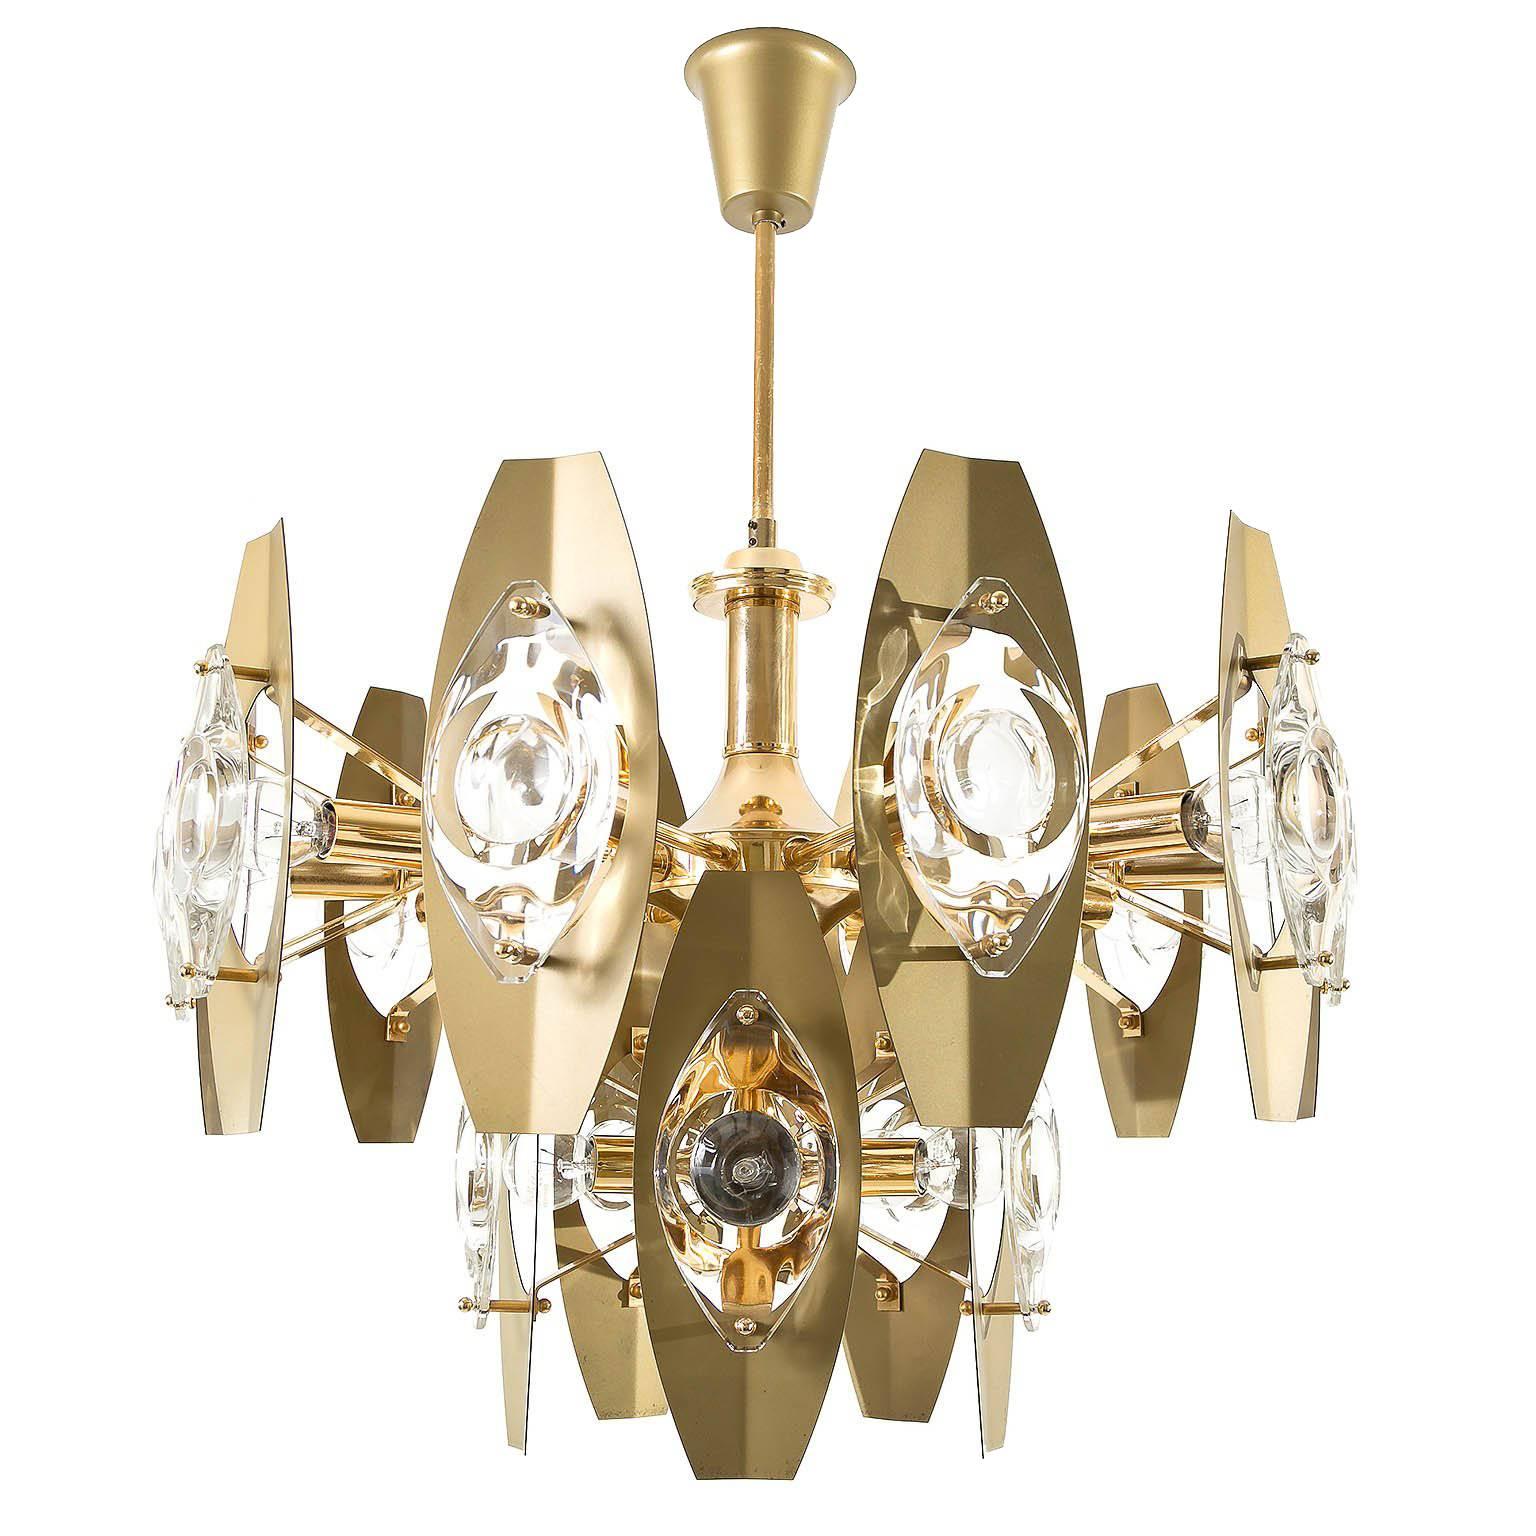 One of two large and beautiful Italian chandeliers designed by Oscar Torlasco in 1968, Italy, manufactured in midcentury, circa 1970 (late 1960s or early 1970s).
The chandelier is made of a polished brass frame and it has 15-arms with sockets for